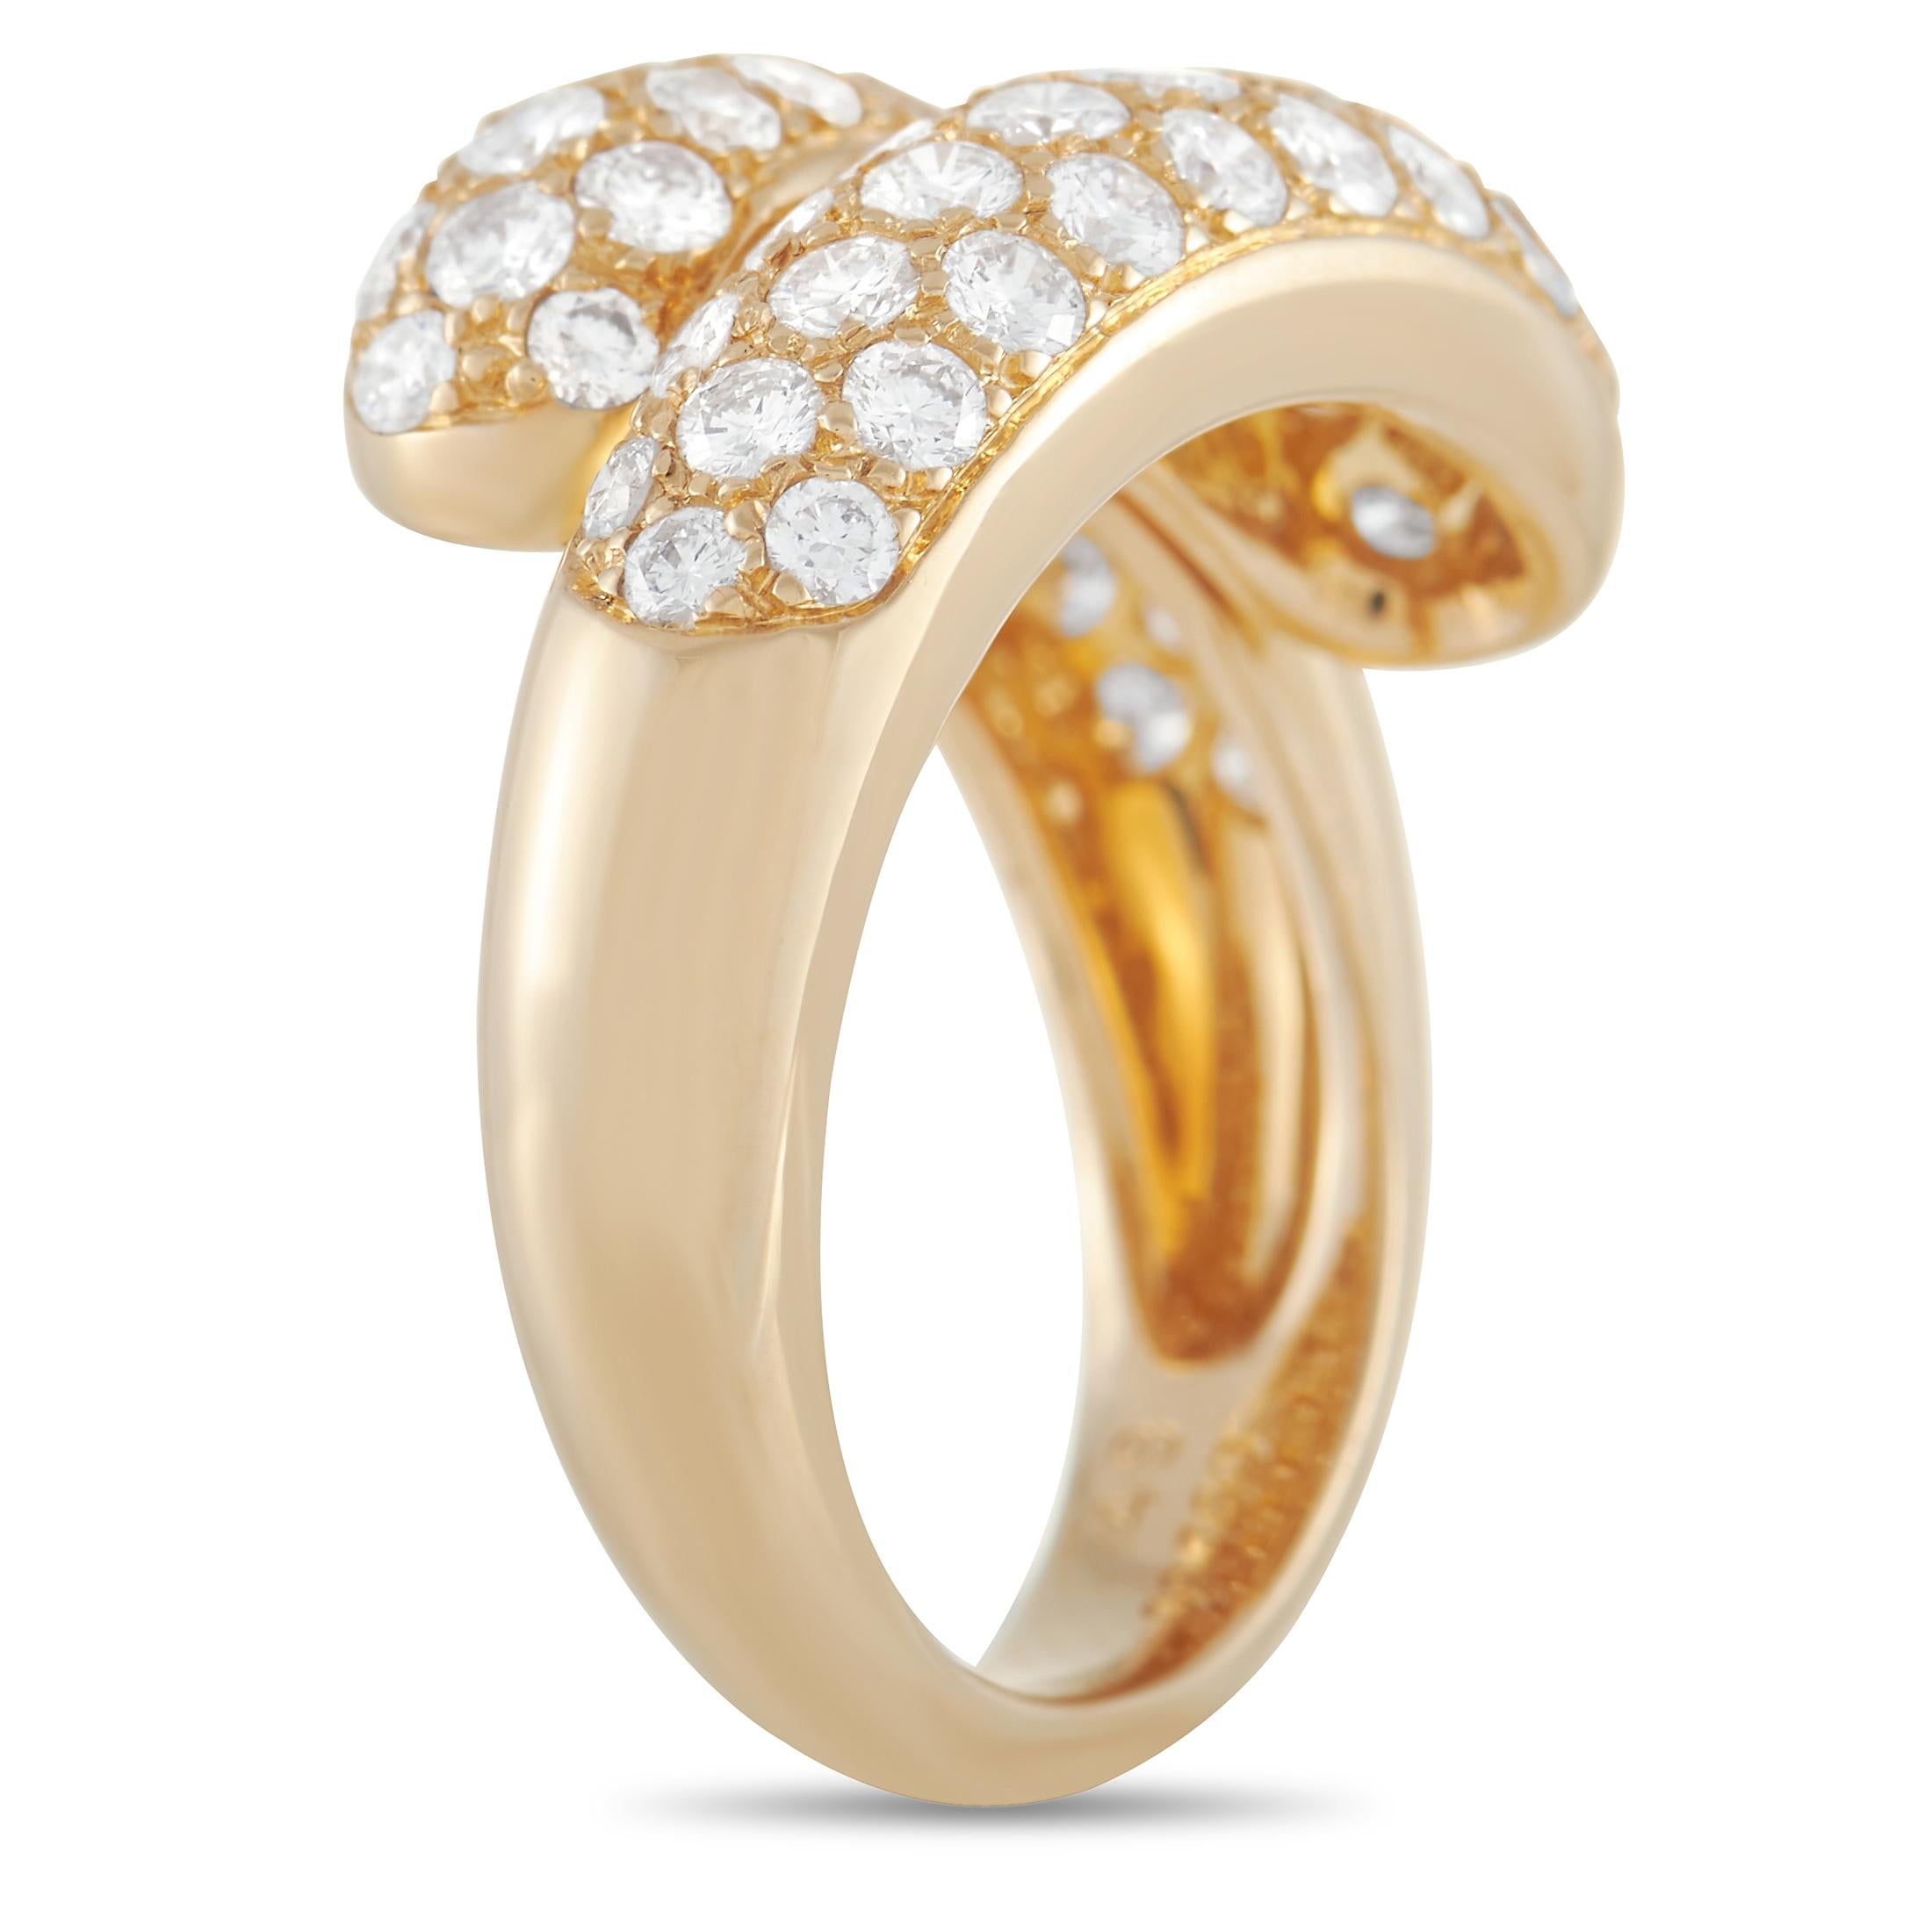 A beautiful, simplistic wrapped design makes this ring from Cartier ideal for any minimalist. Crafted from 18K yellow gold, this piece features a band width and a top height of 4mm. But it’s the glittering pavé diamonds totaling 1.50 carats with E